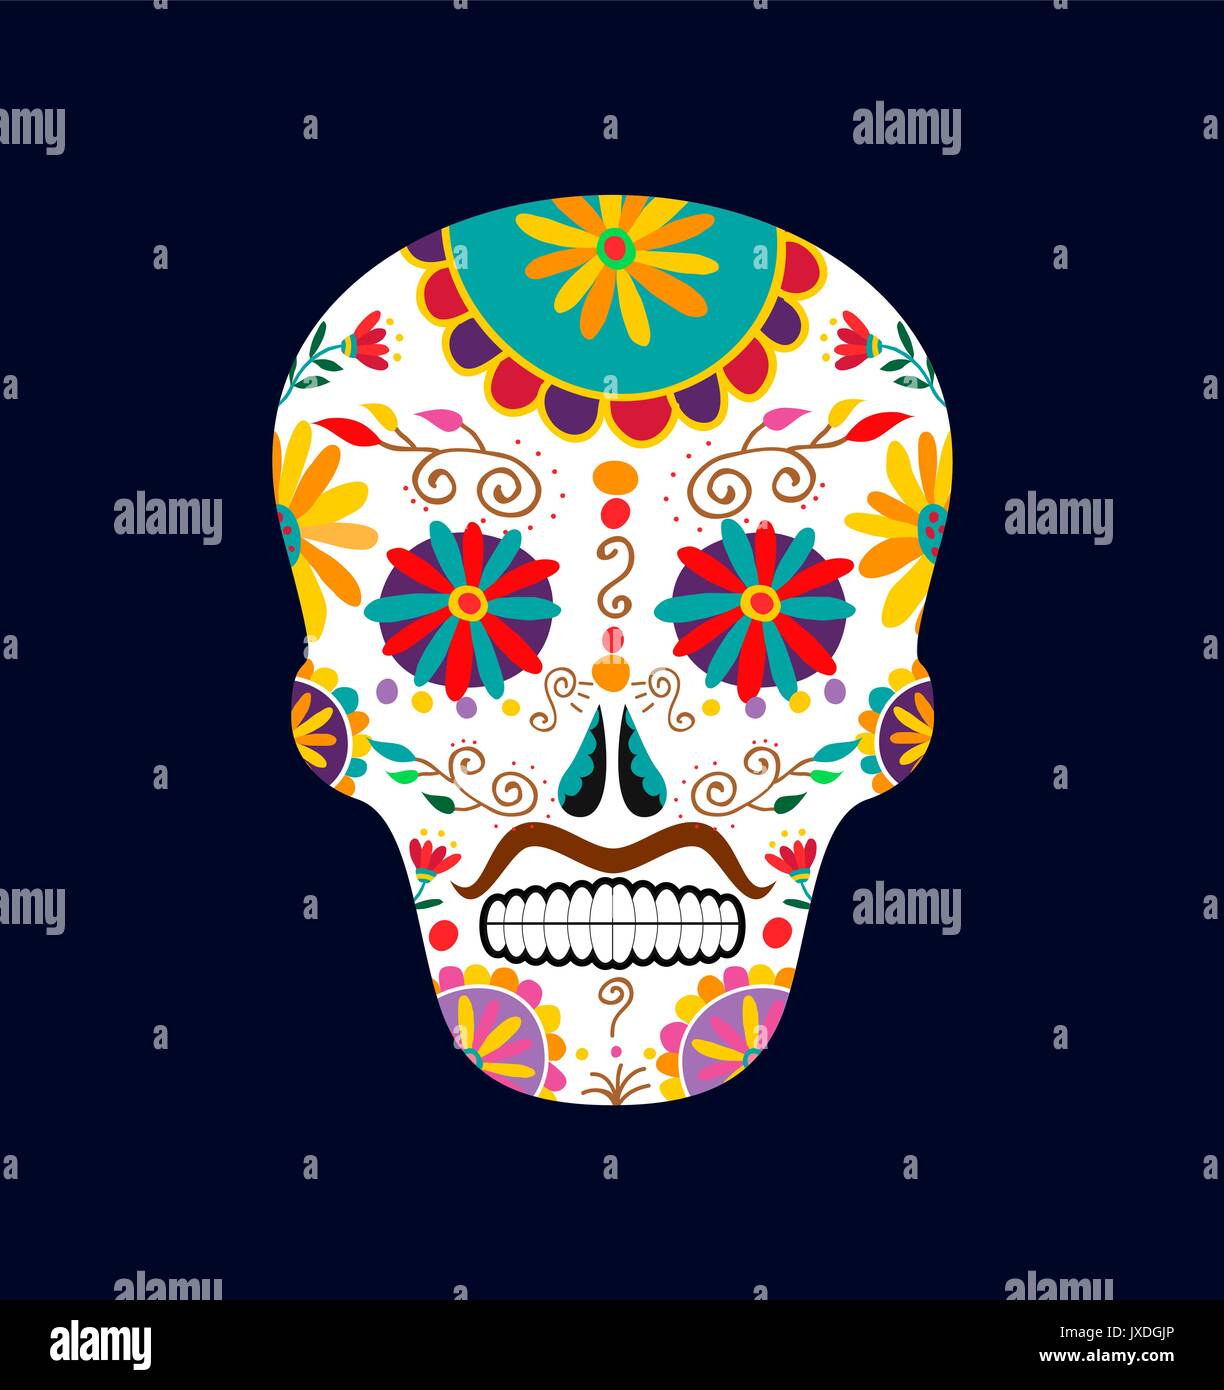 Day of the dead sugar skull illustration for mexican celebration, traditional mexico skeleton decoration with flowers and colorful art. EPS10 vector. Stock Vector